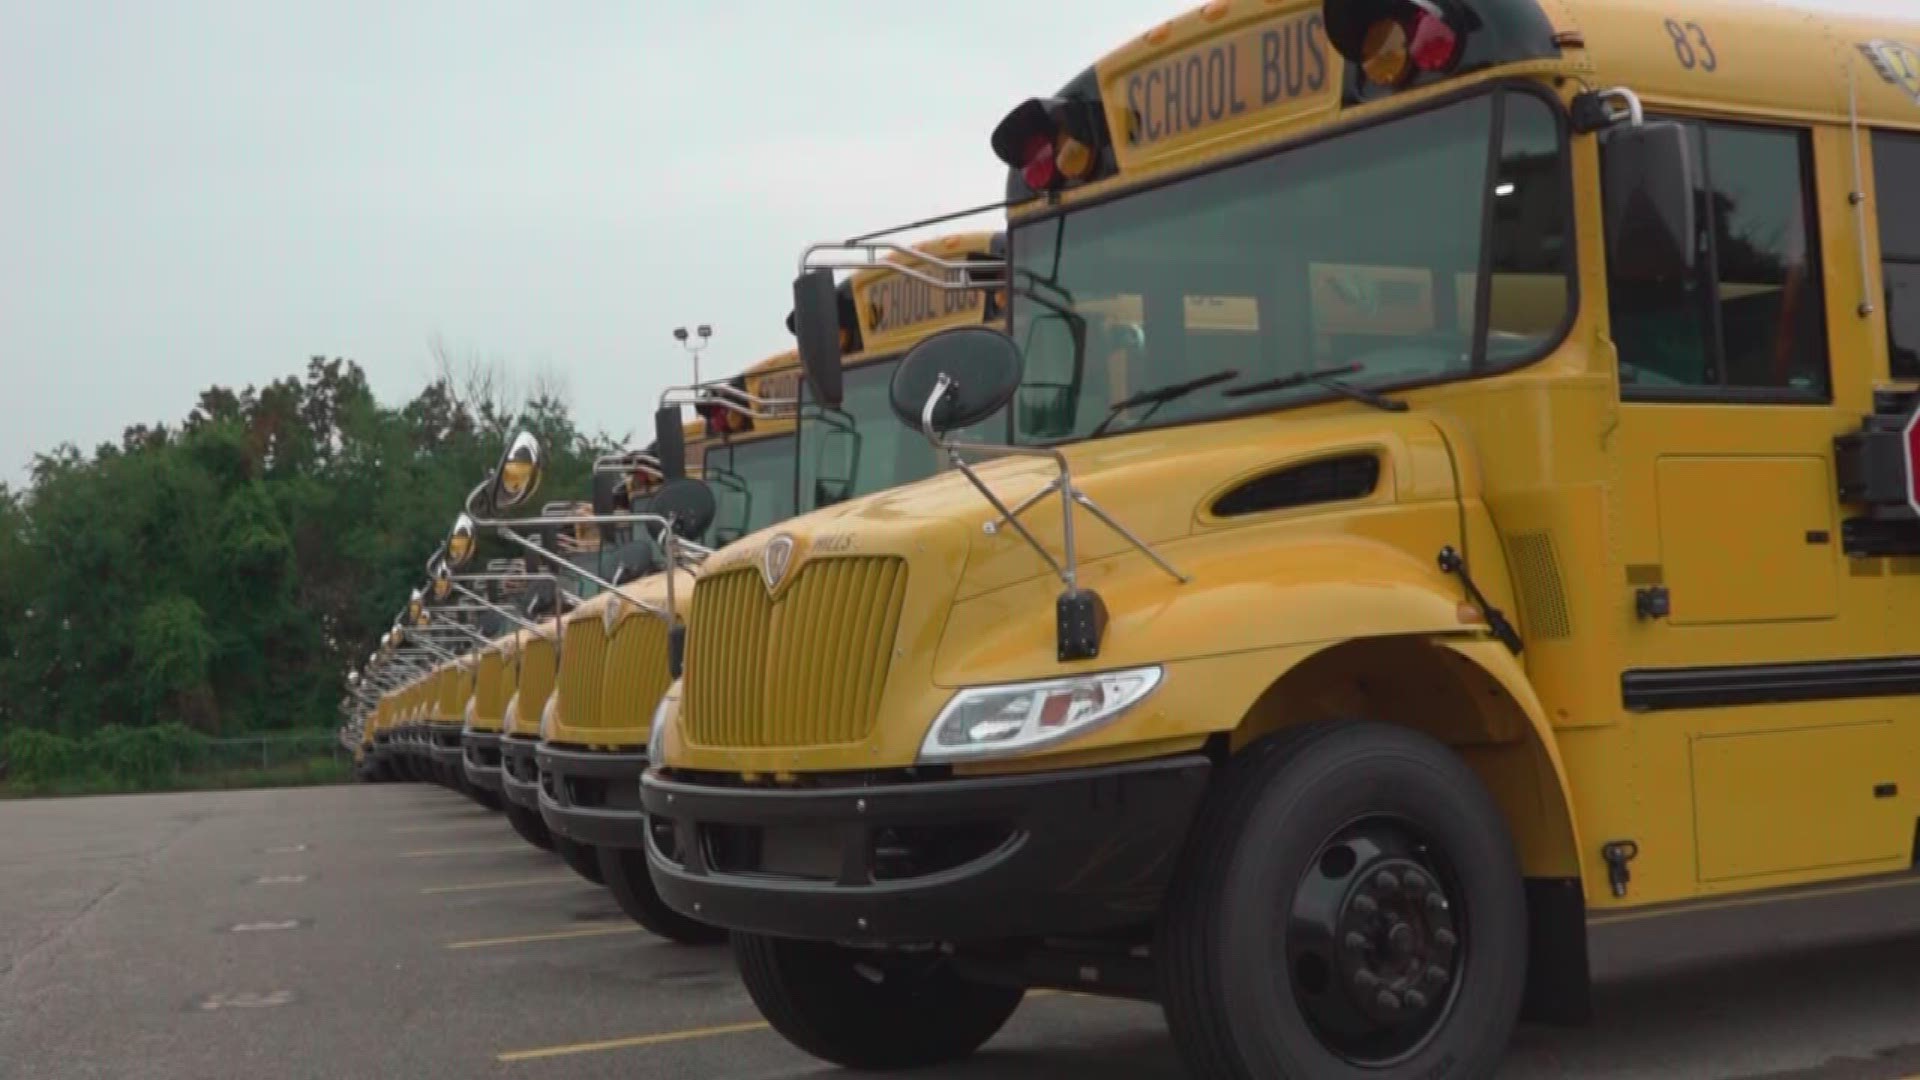 Forest Hills parents can now track buses